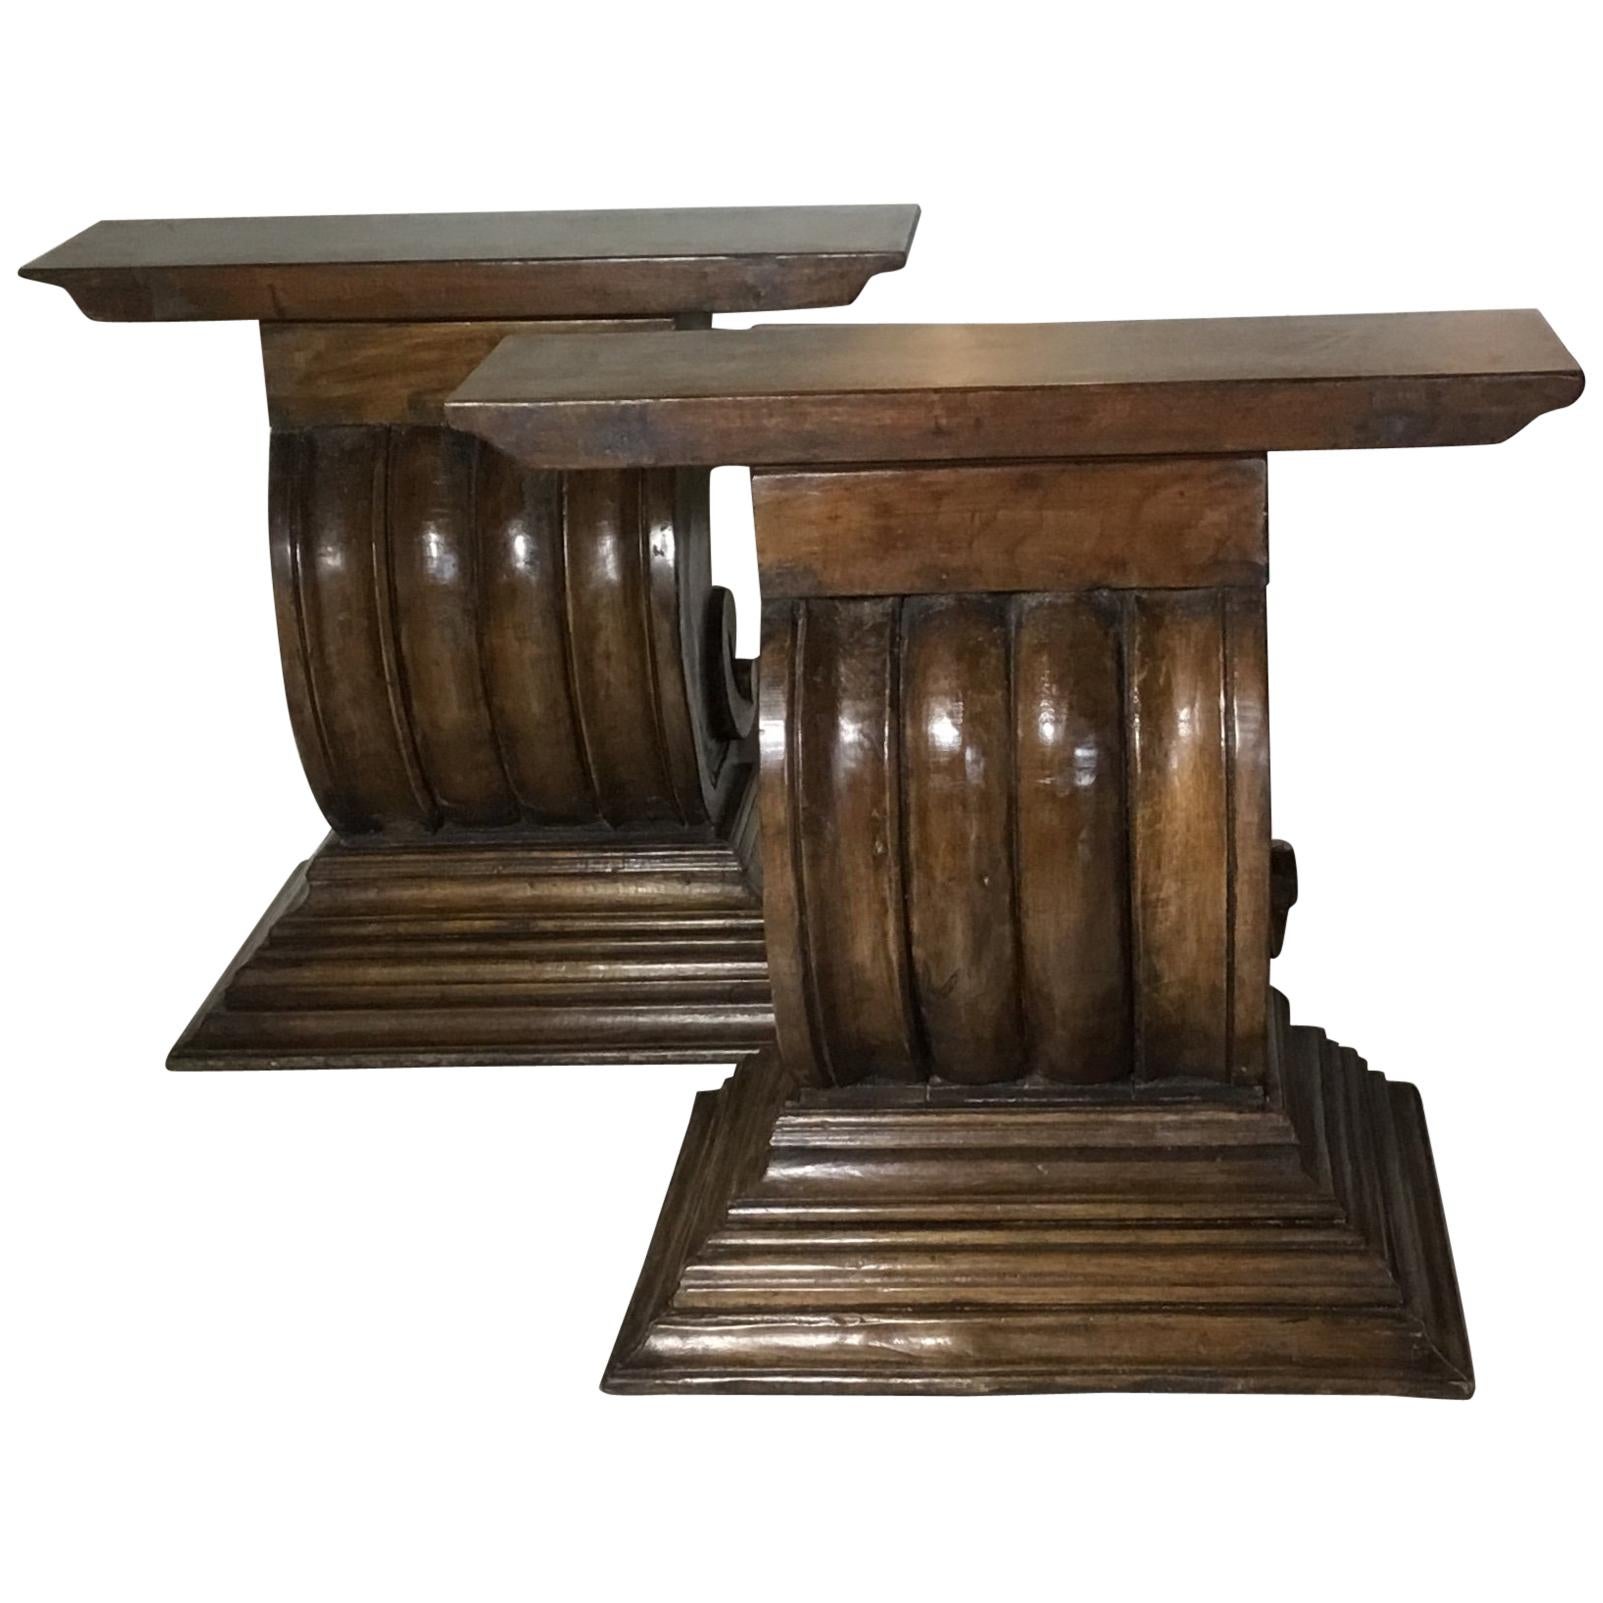 Pair of Antique Hand Carved Wood Console Or Table Base.